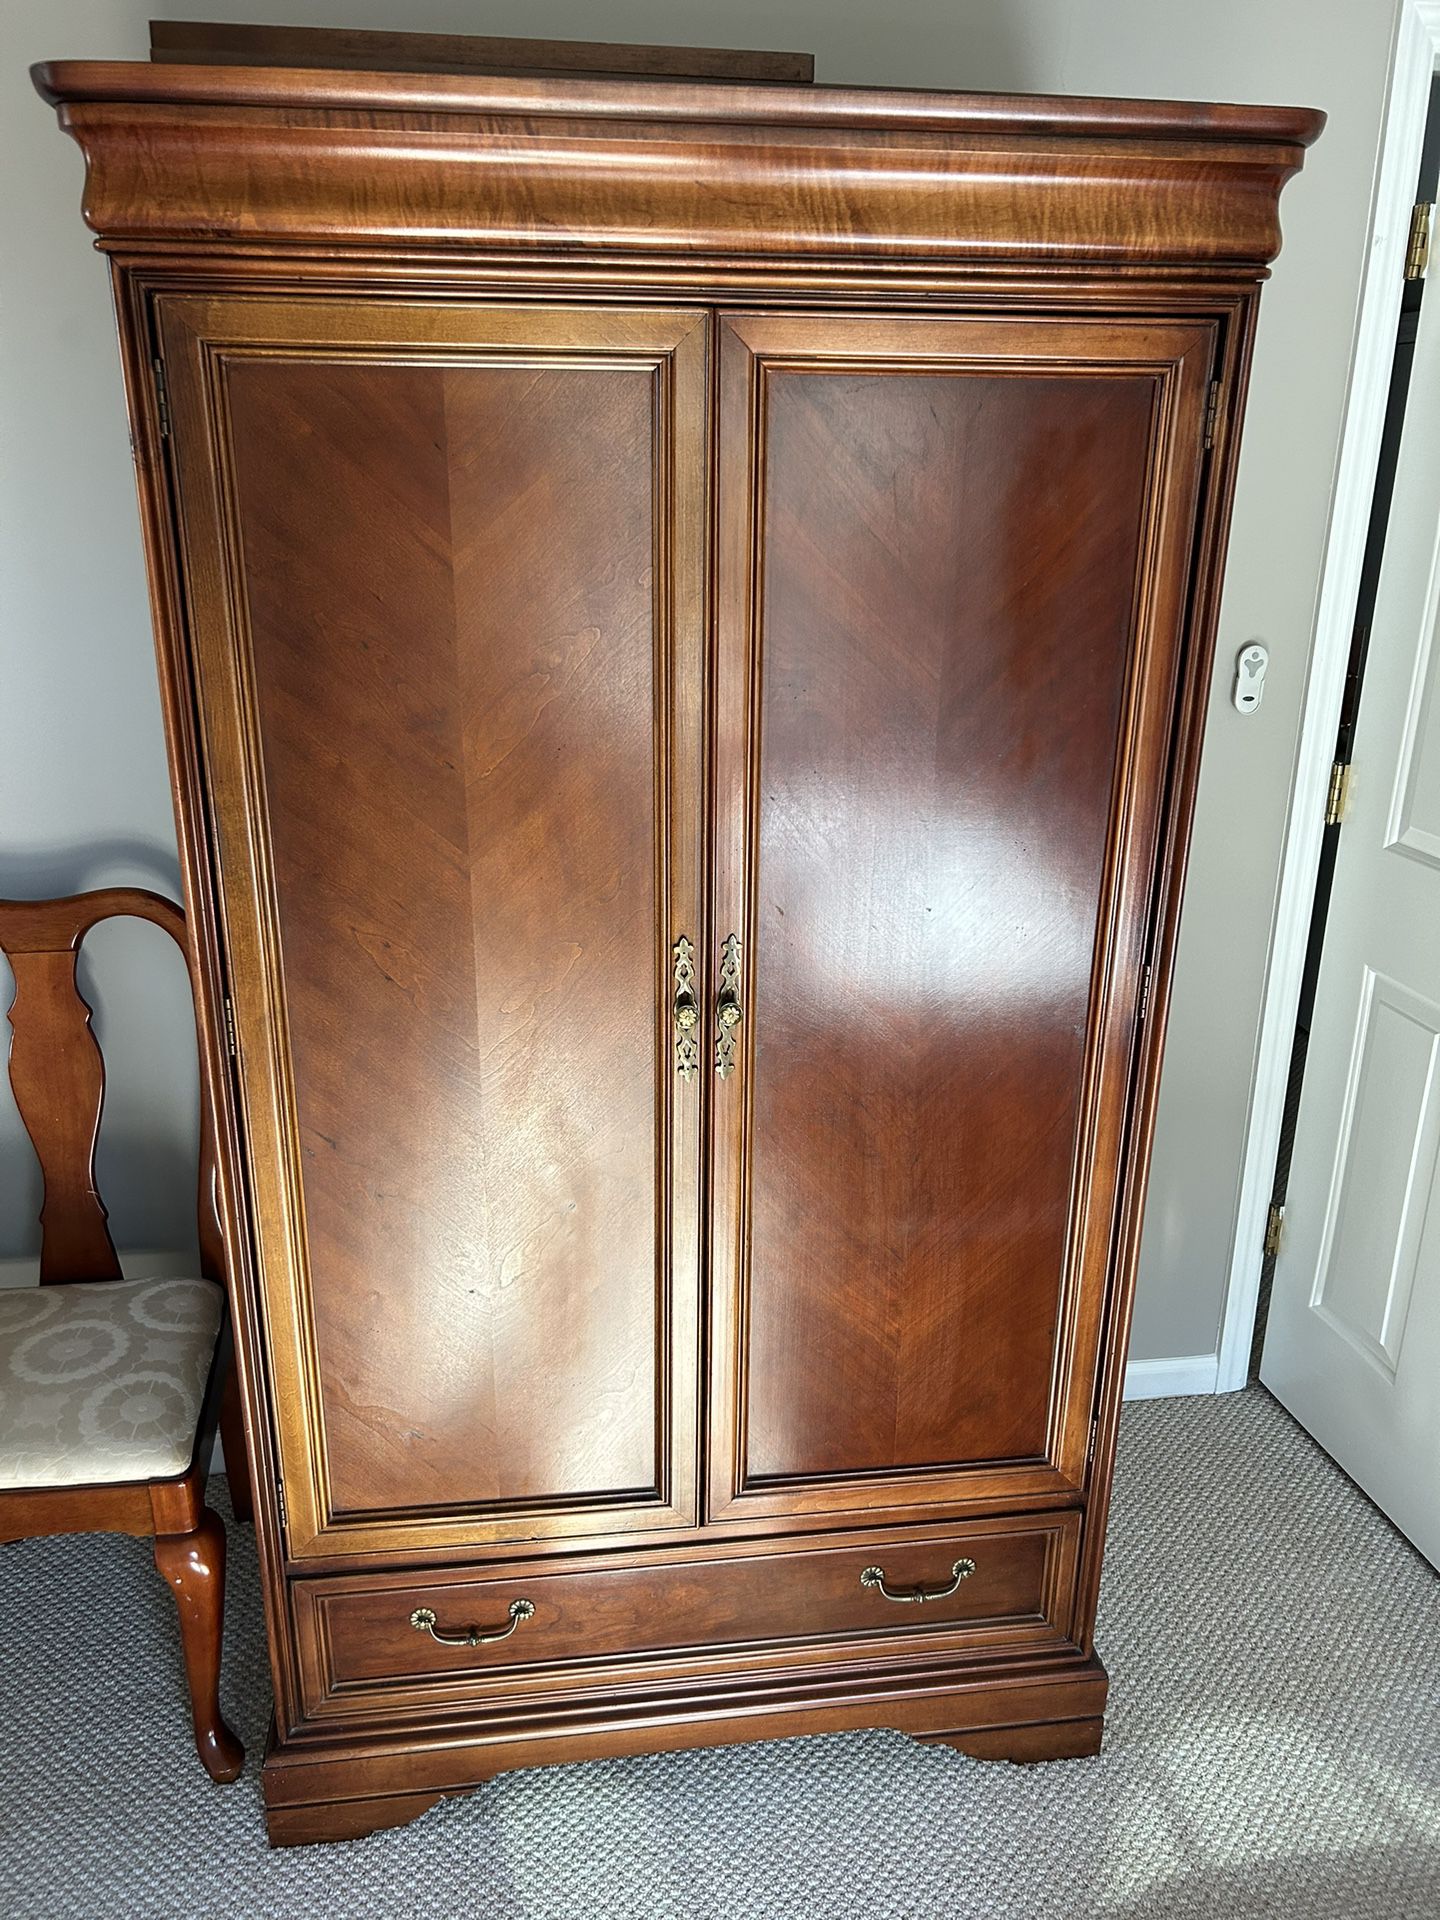 Beautiful Solid Wood Armoire TV Cabinet